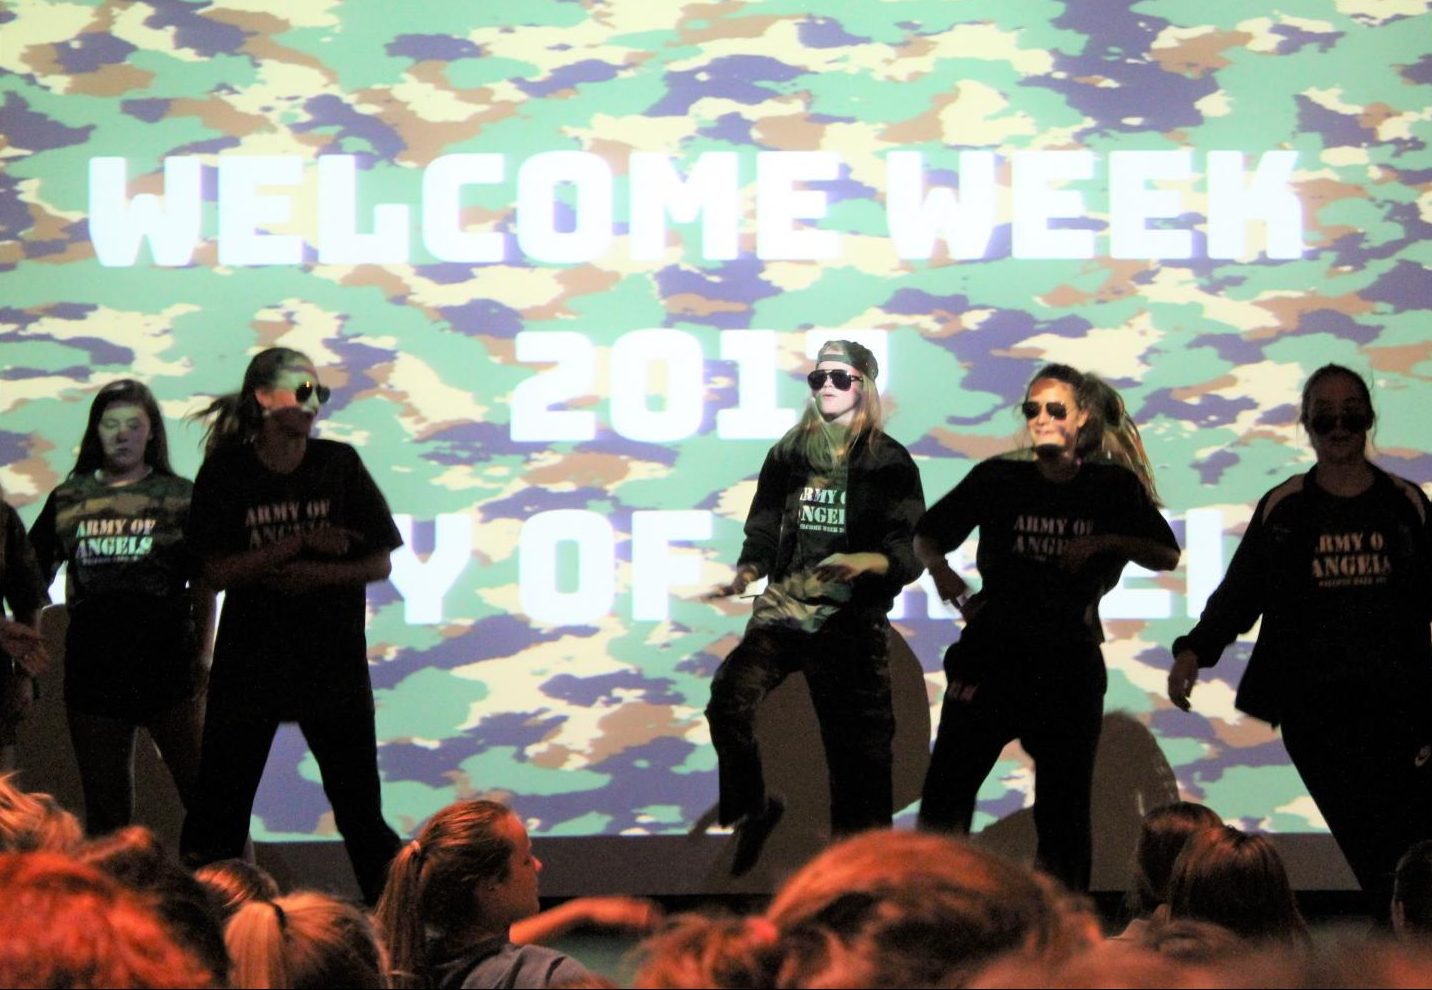 STUCO members kick off welcome week with the reveal of the theme and freshman hats